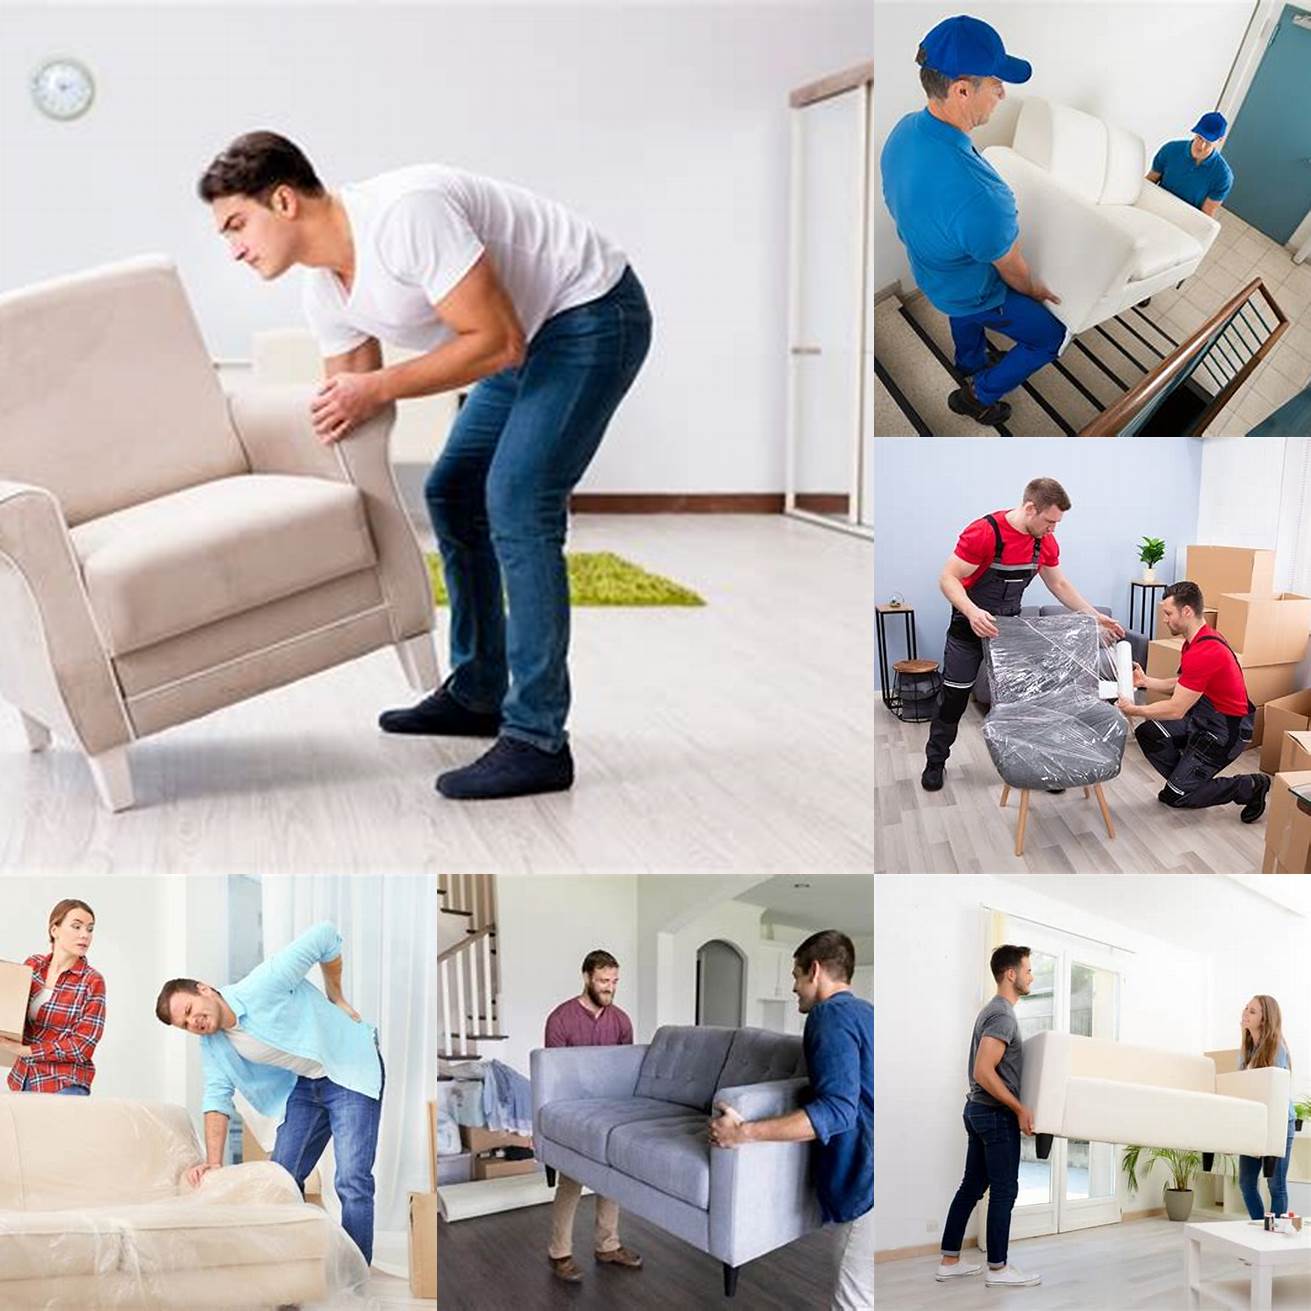 Take care when moving your furniture